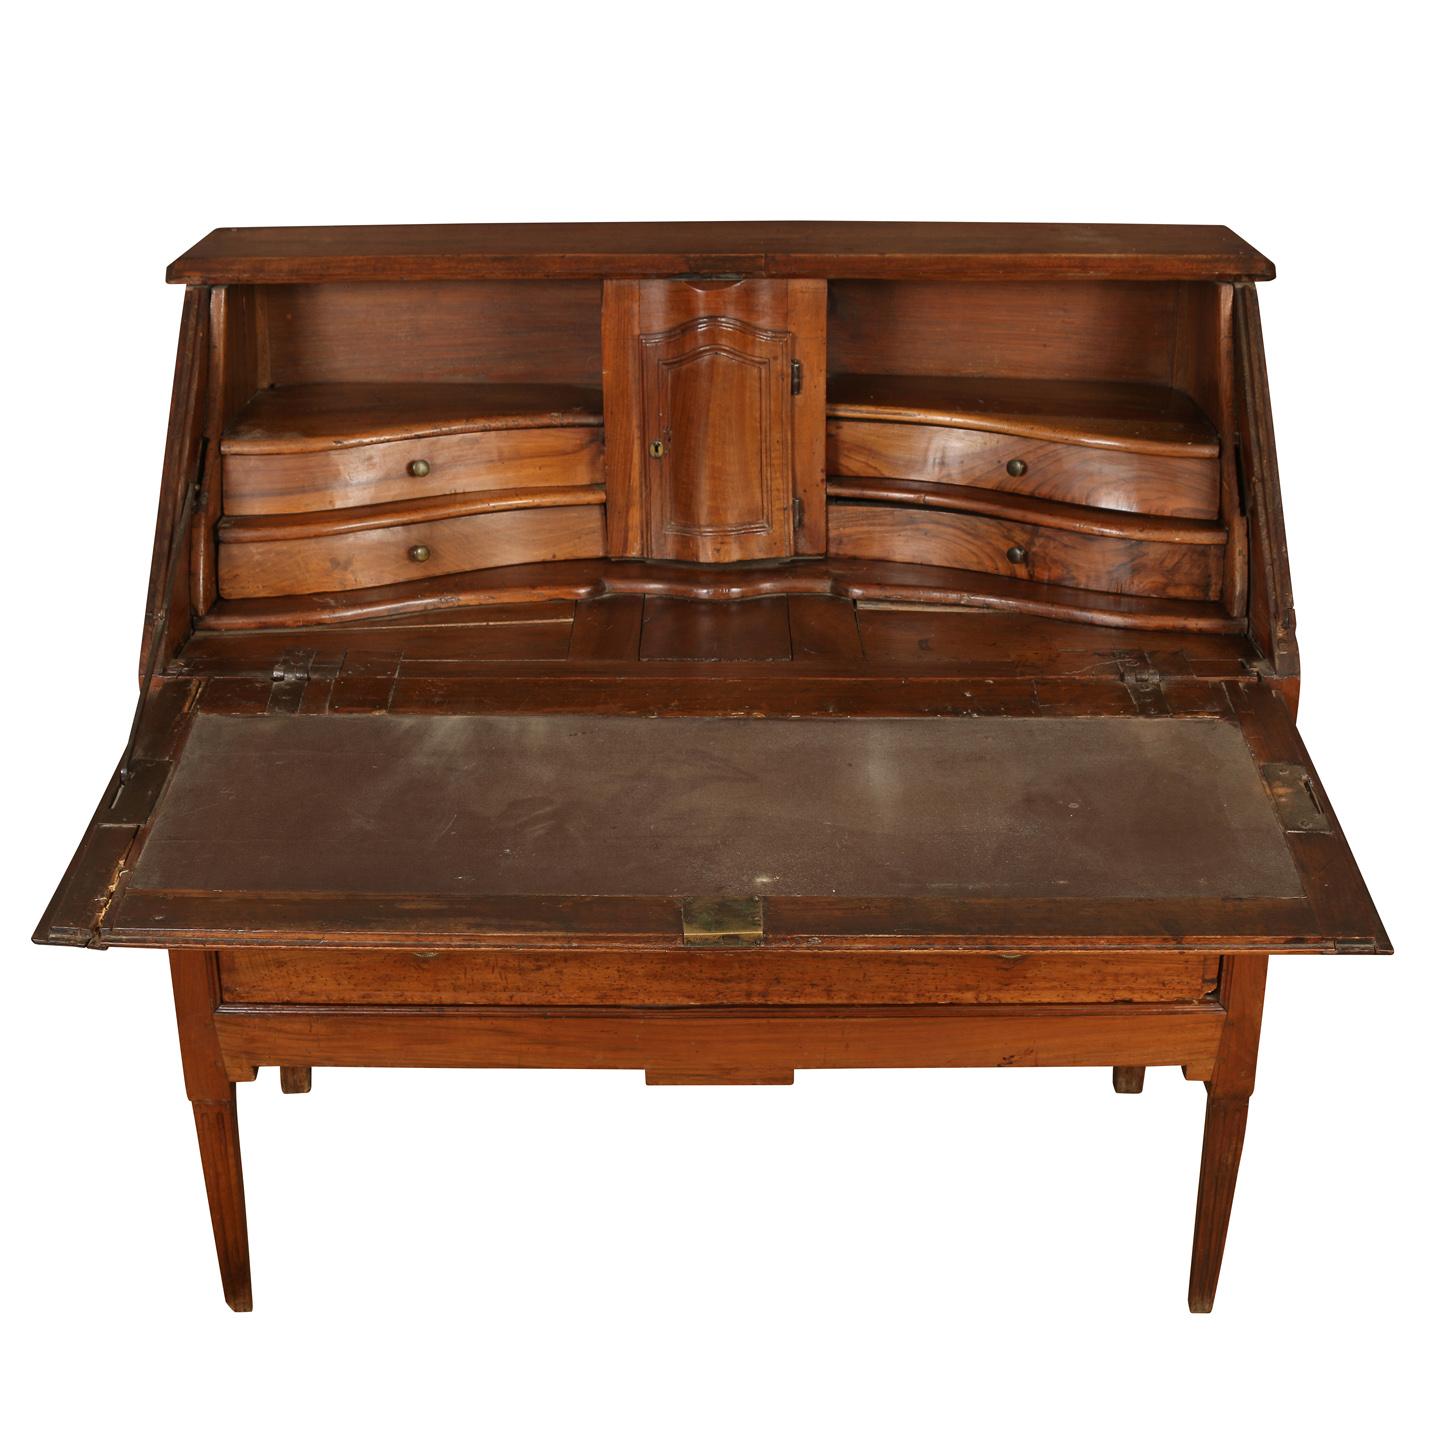 French walnut 19th century slant front secretary chest or desk with storage in three drawers and writing surface opens to reveal beautiful curved drawers and hidden cubbies. When open measures 37